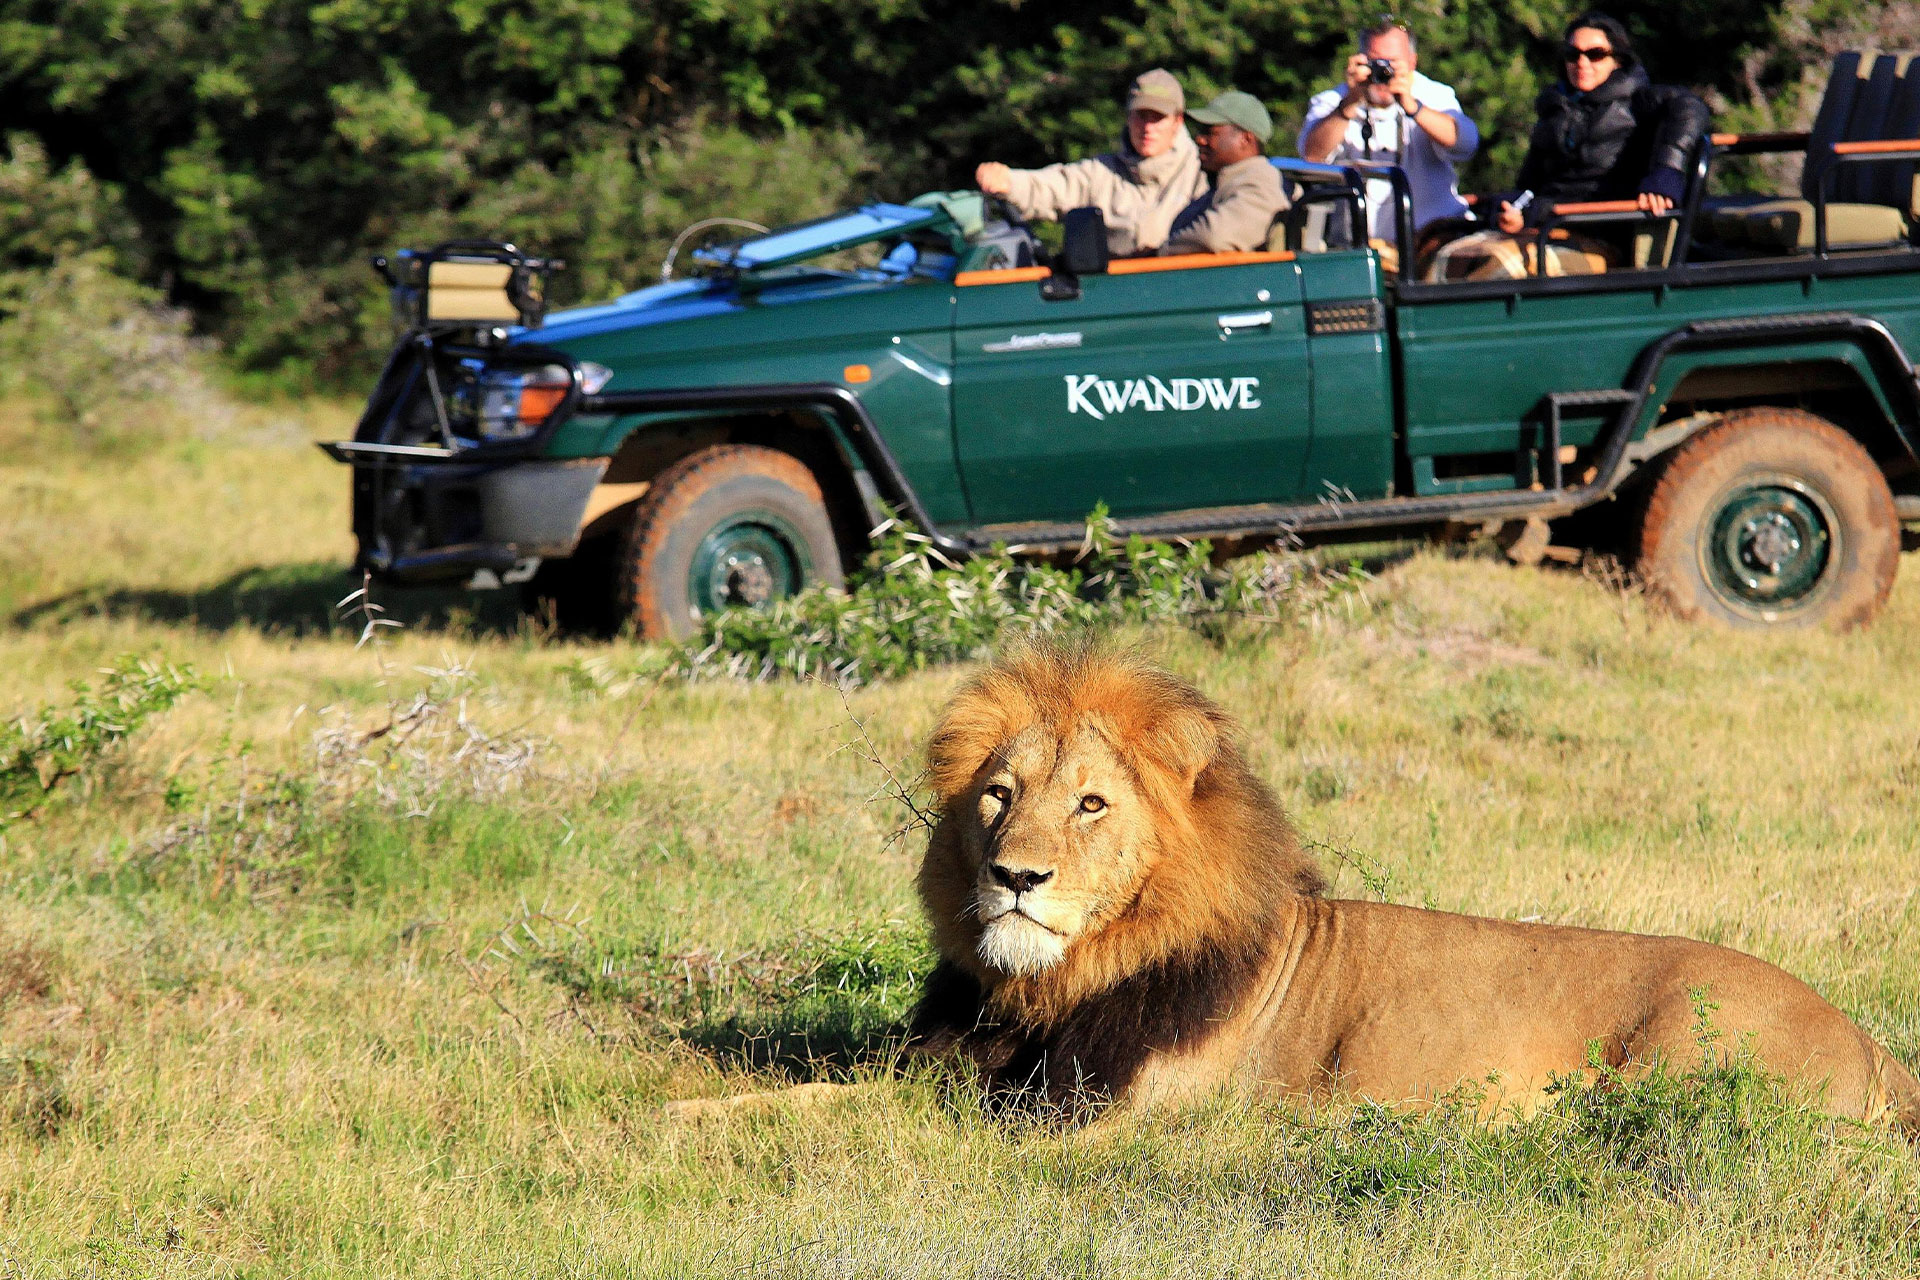 A large male lion and a safari vehicle during a game drive at Kwandwe Private Game Reserve